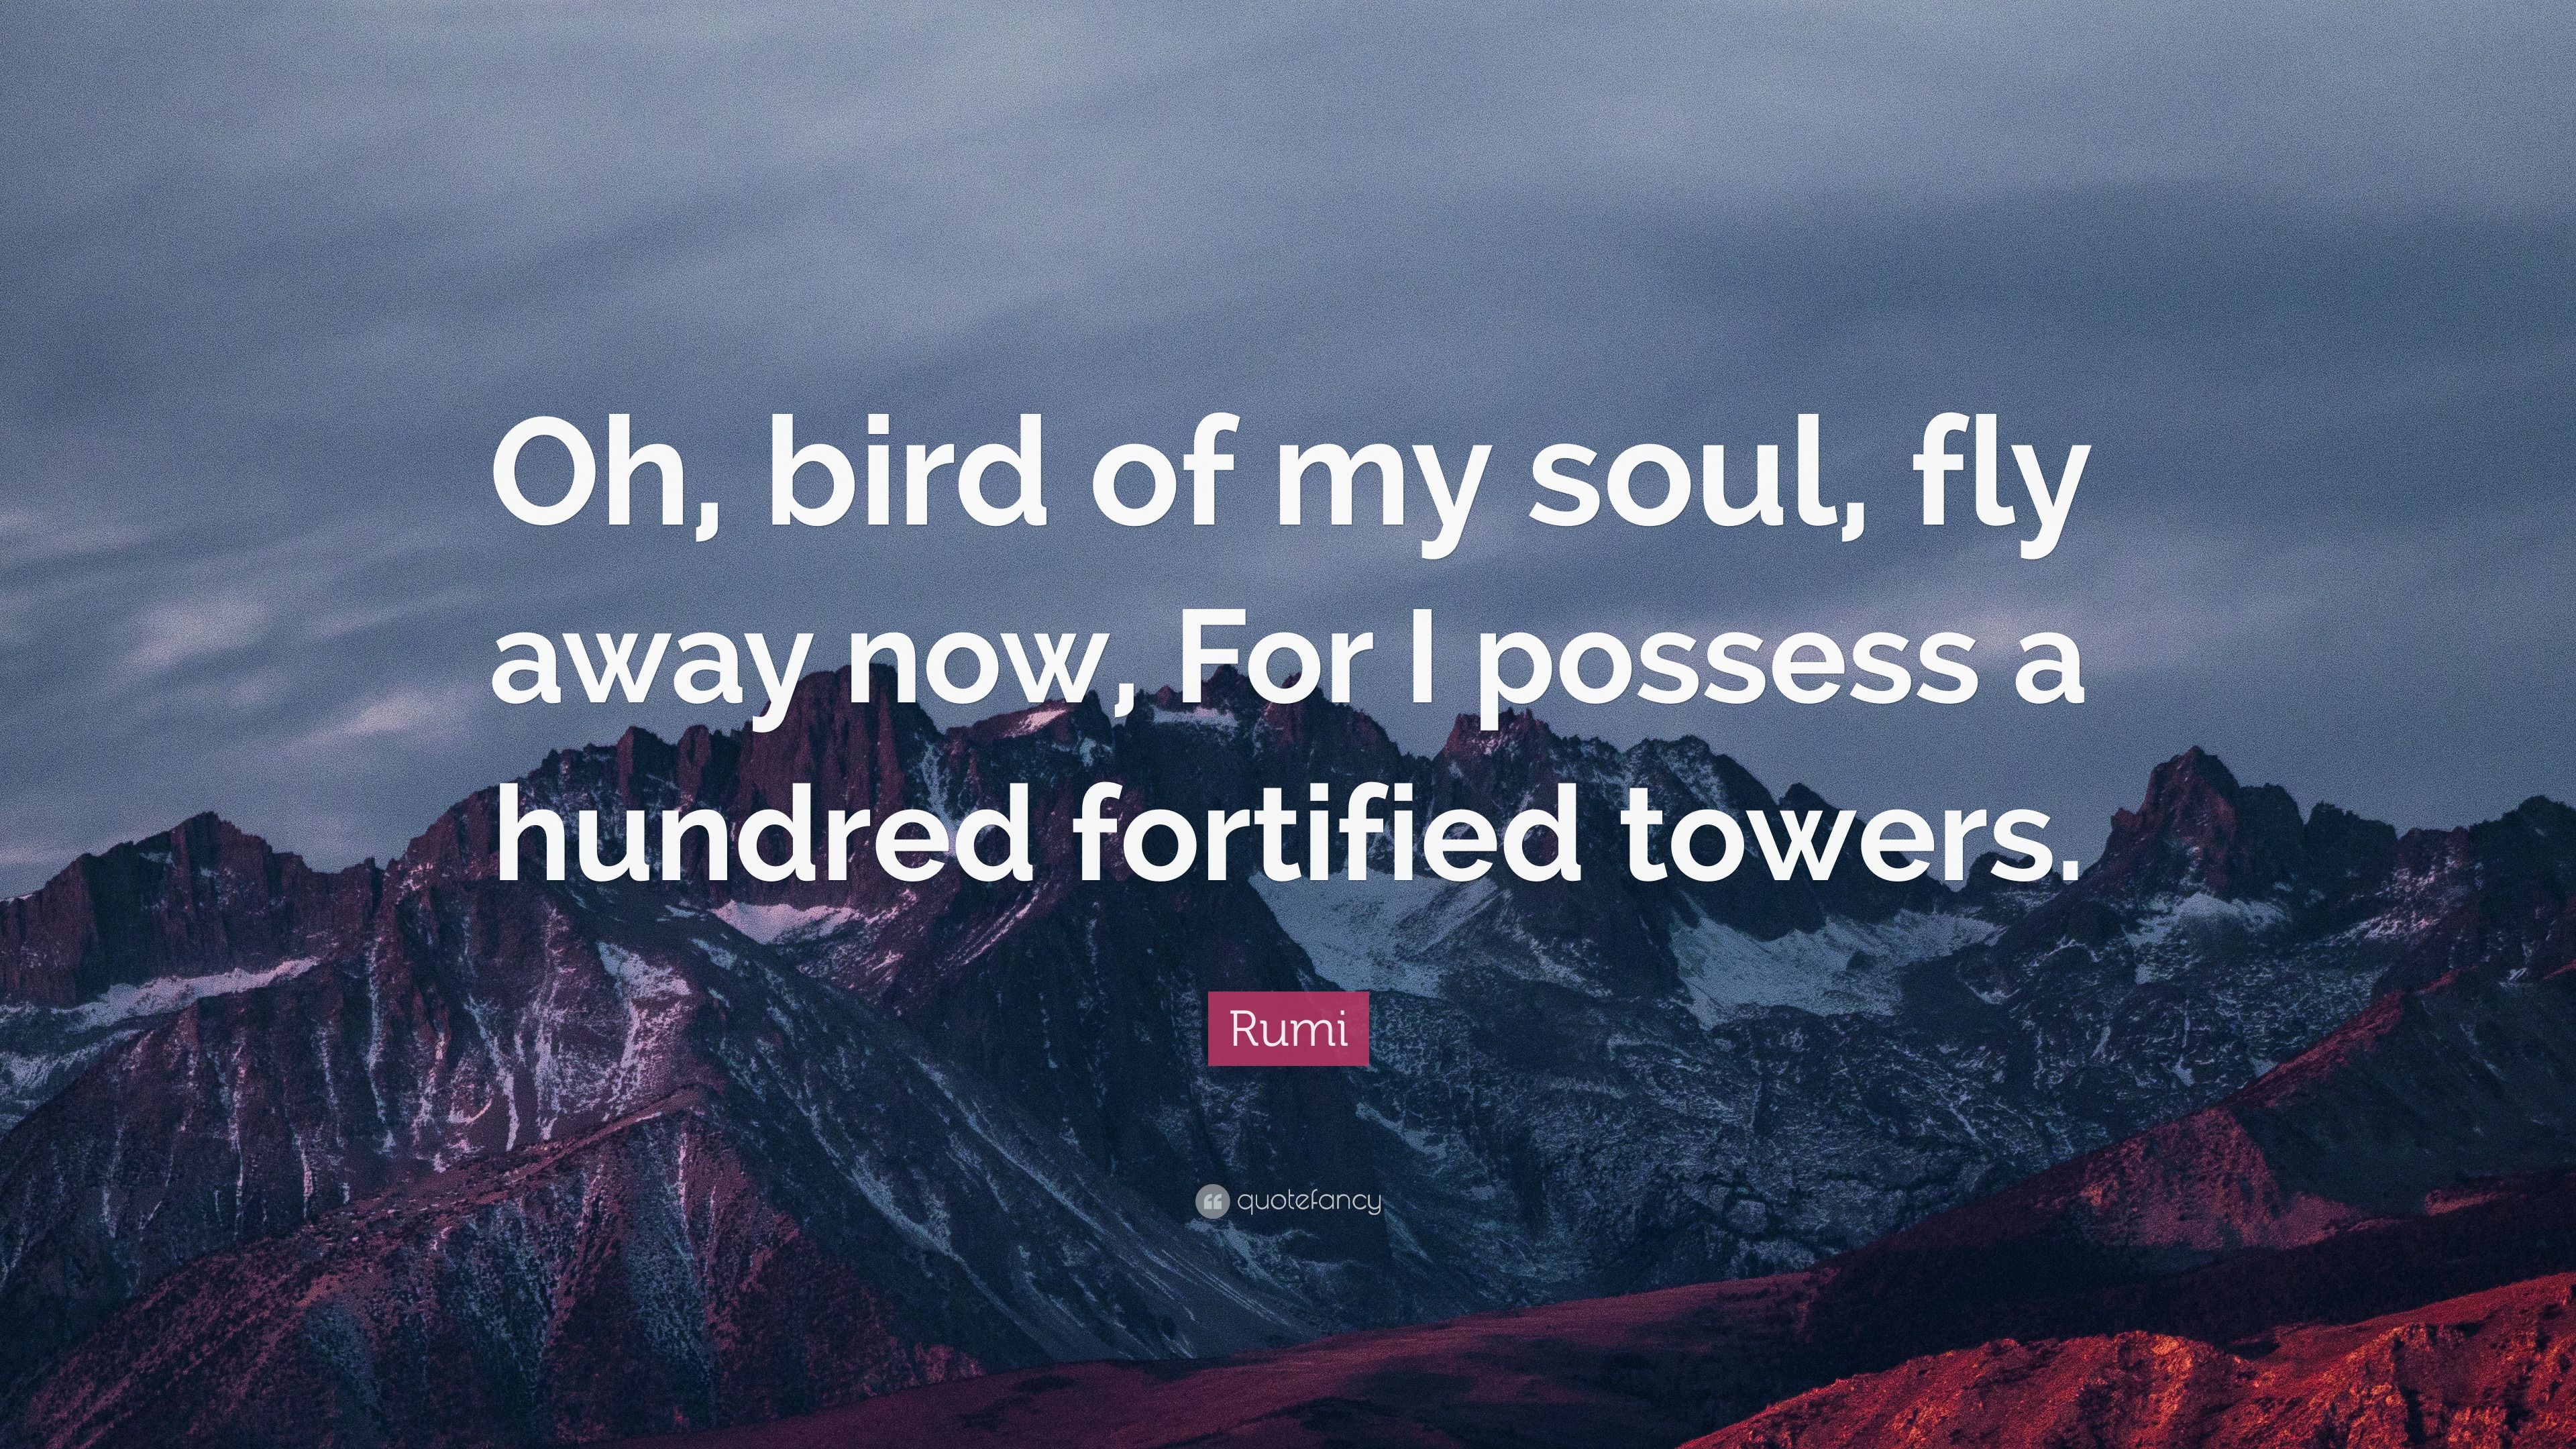 3840x2160 Rumi Quote: “Oh, bird of my soul, fly away now, For